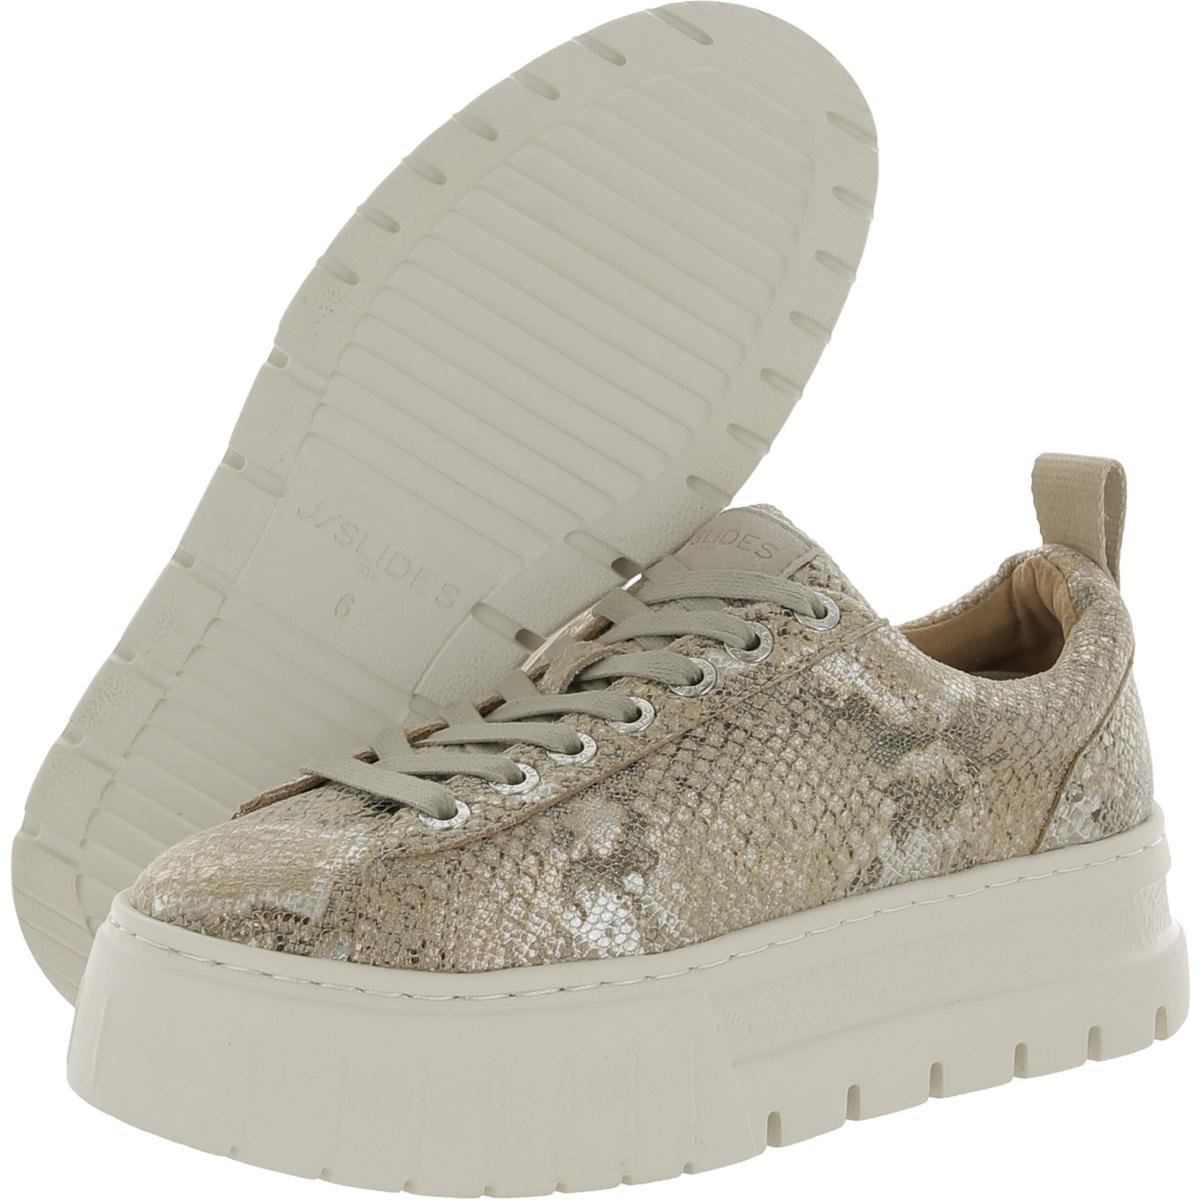 J/Slides Womens Roger Platform Trainers Casual and Fashion Sneakers BHFO  6380